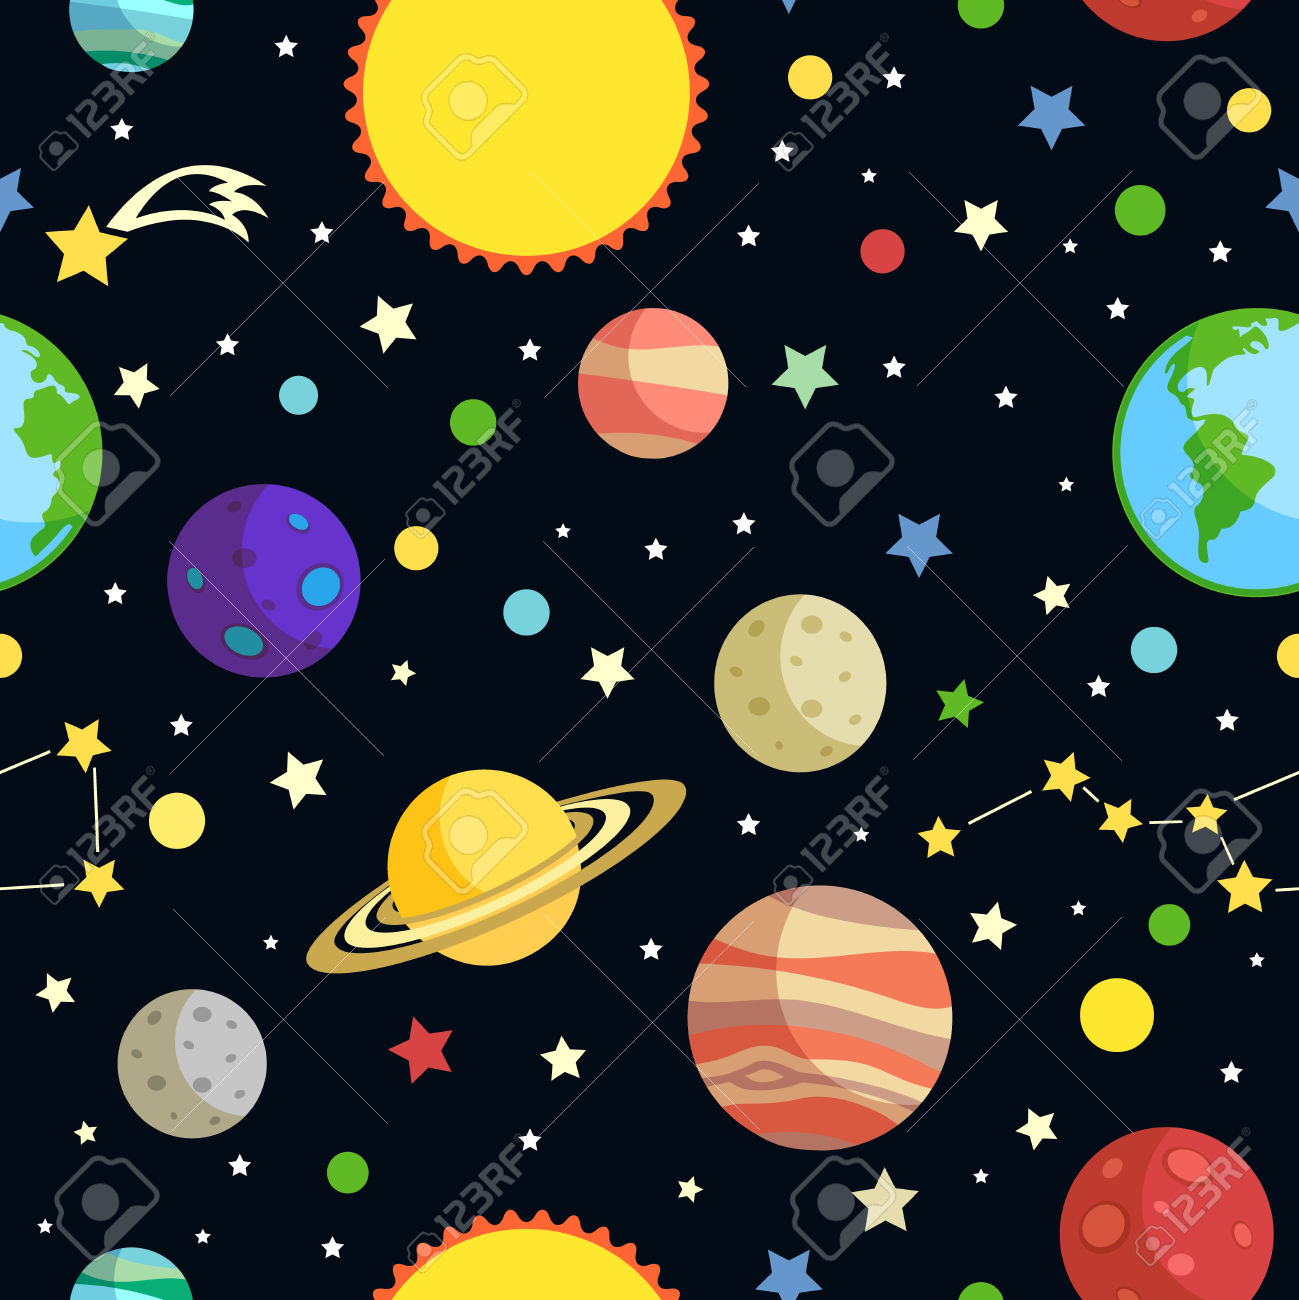 Free space background.